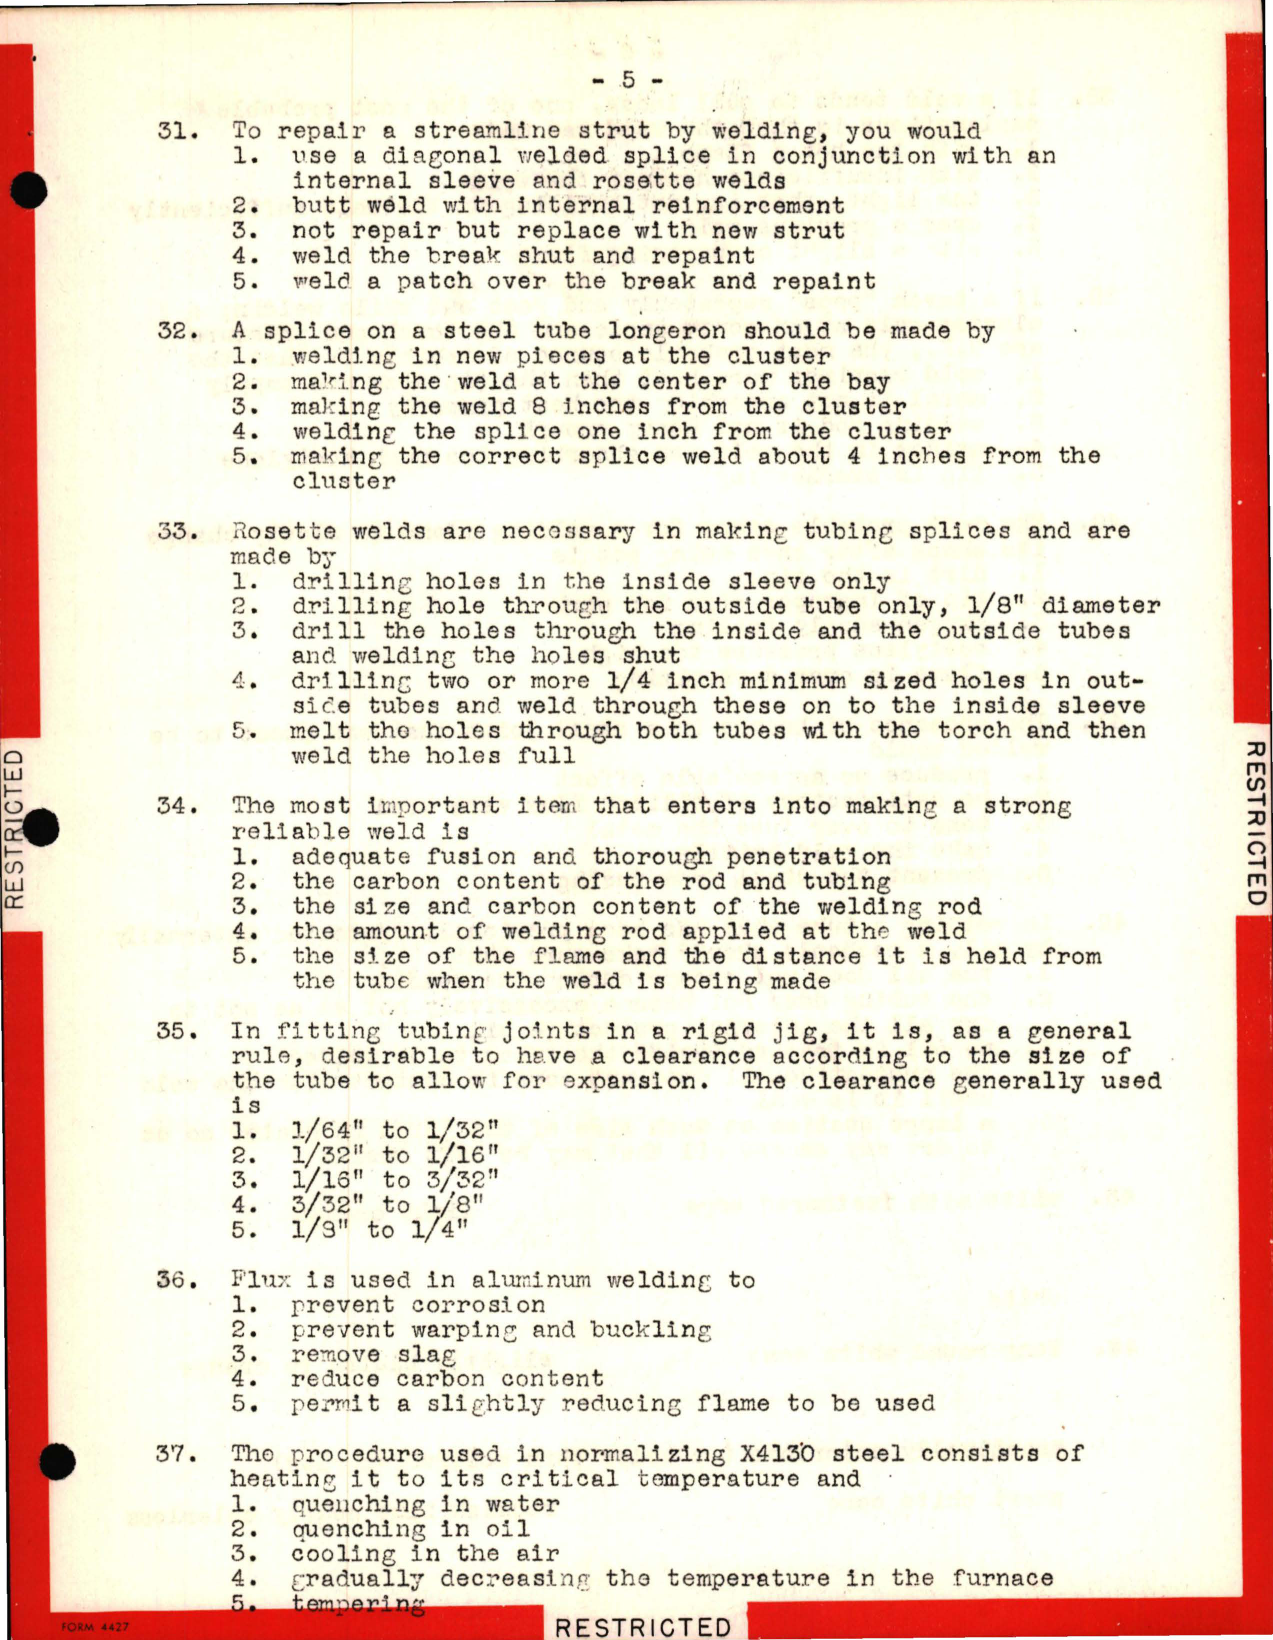 Sample page 5 from AirCorps Library document: Instructor Training Questions for Sheet Metal and Welding, Lockheed-Vega Service School